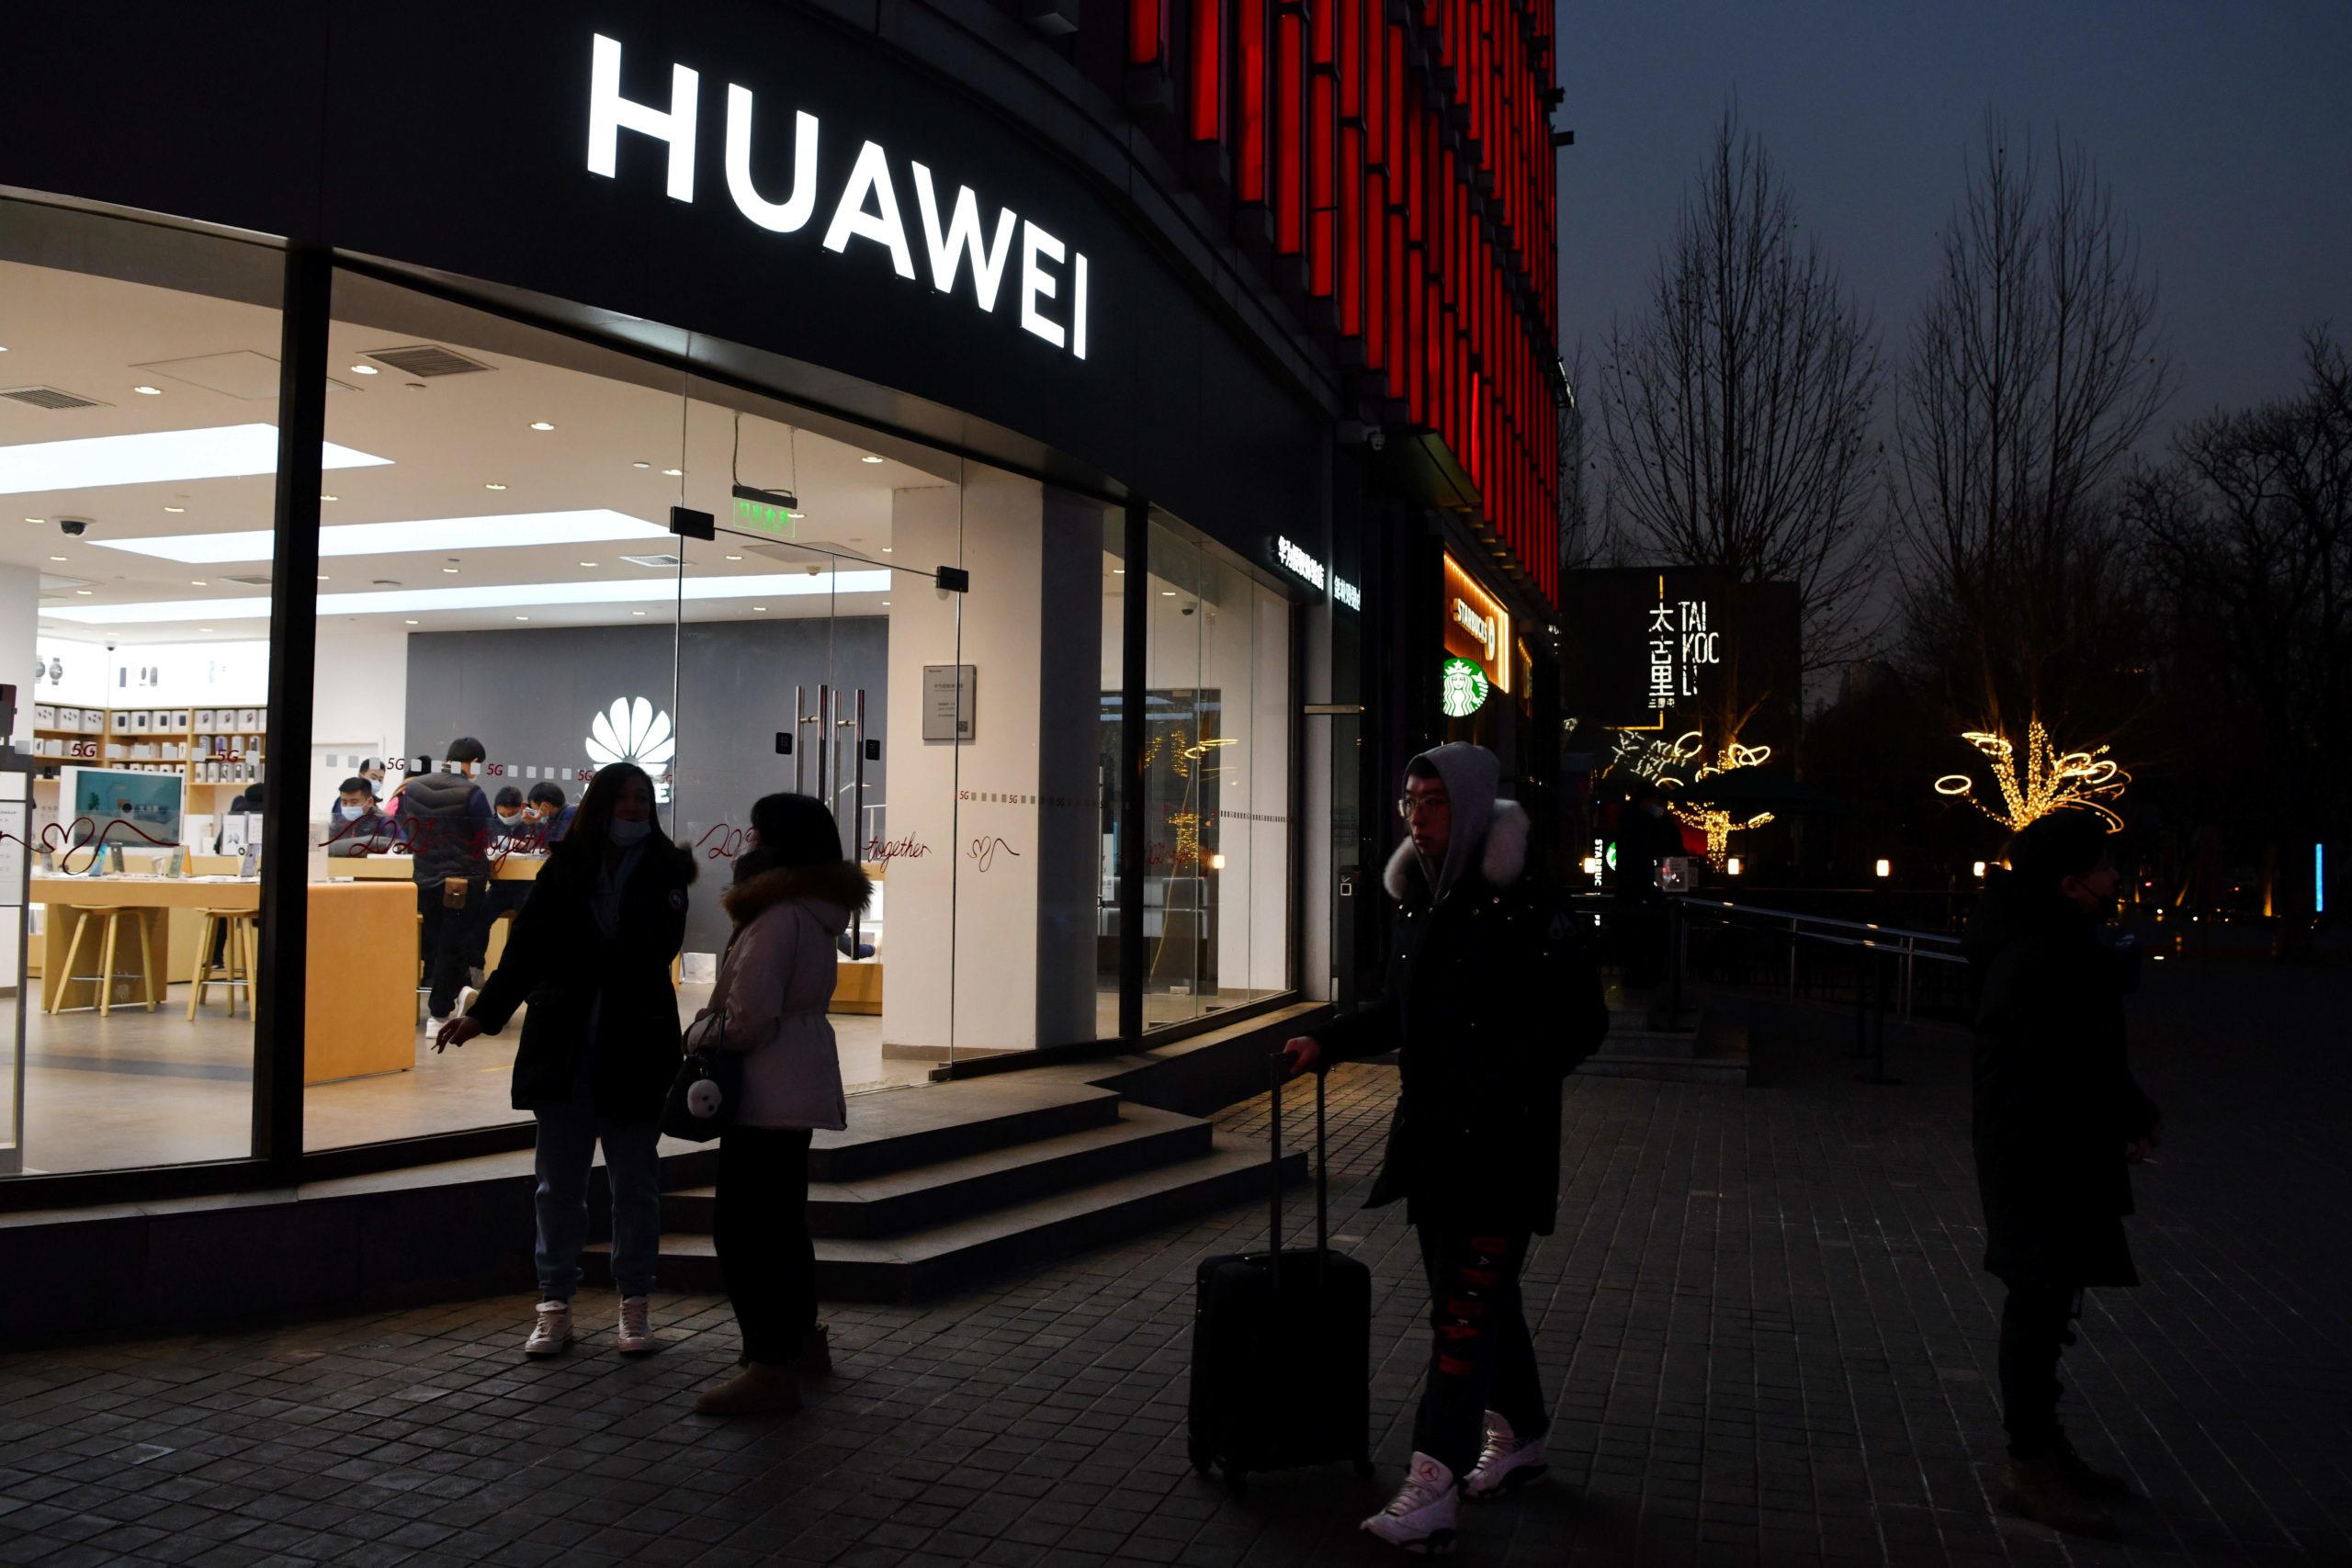 People stand outside a Huawei store in Beijing on Jan. 29. (Greg Baker/AFP via Getty Images)